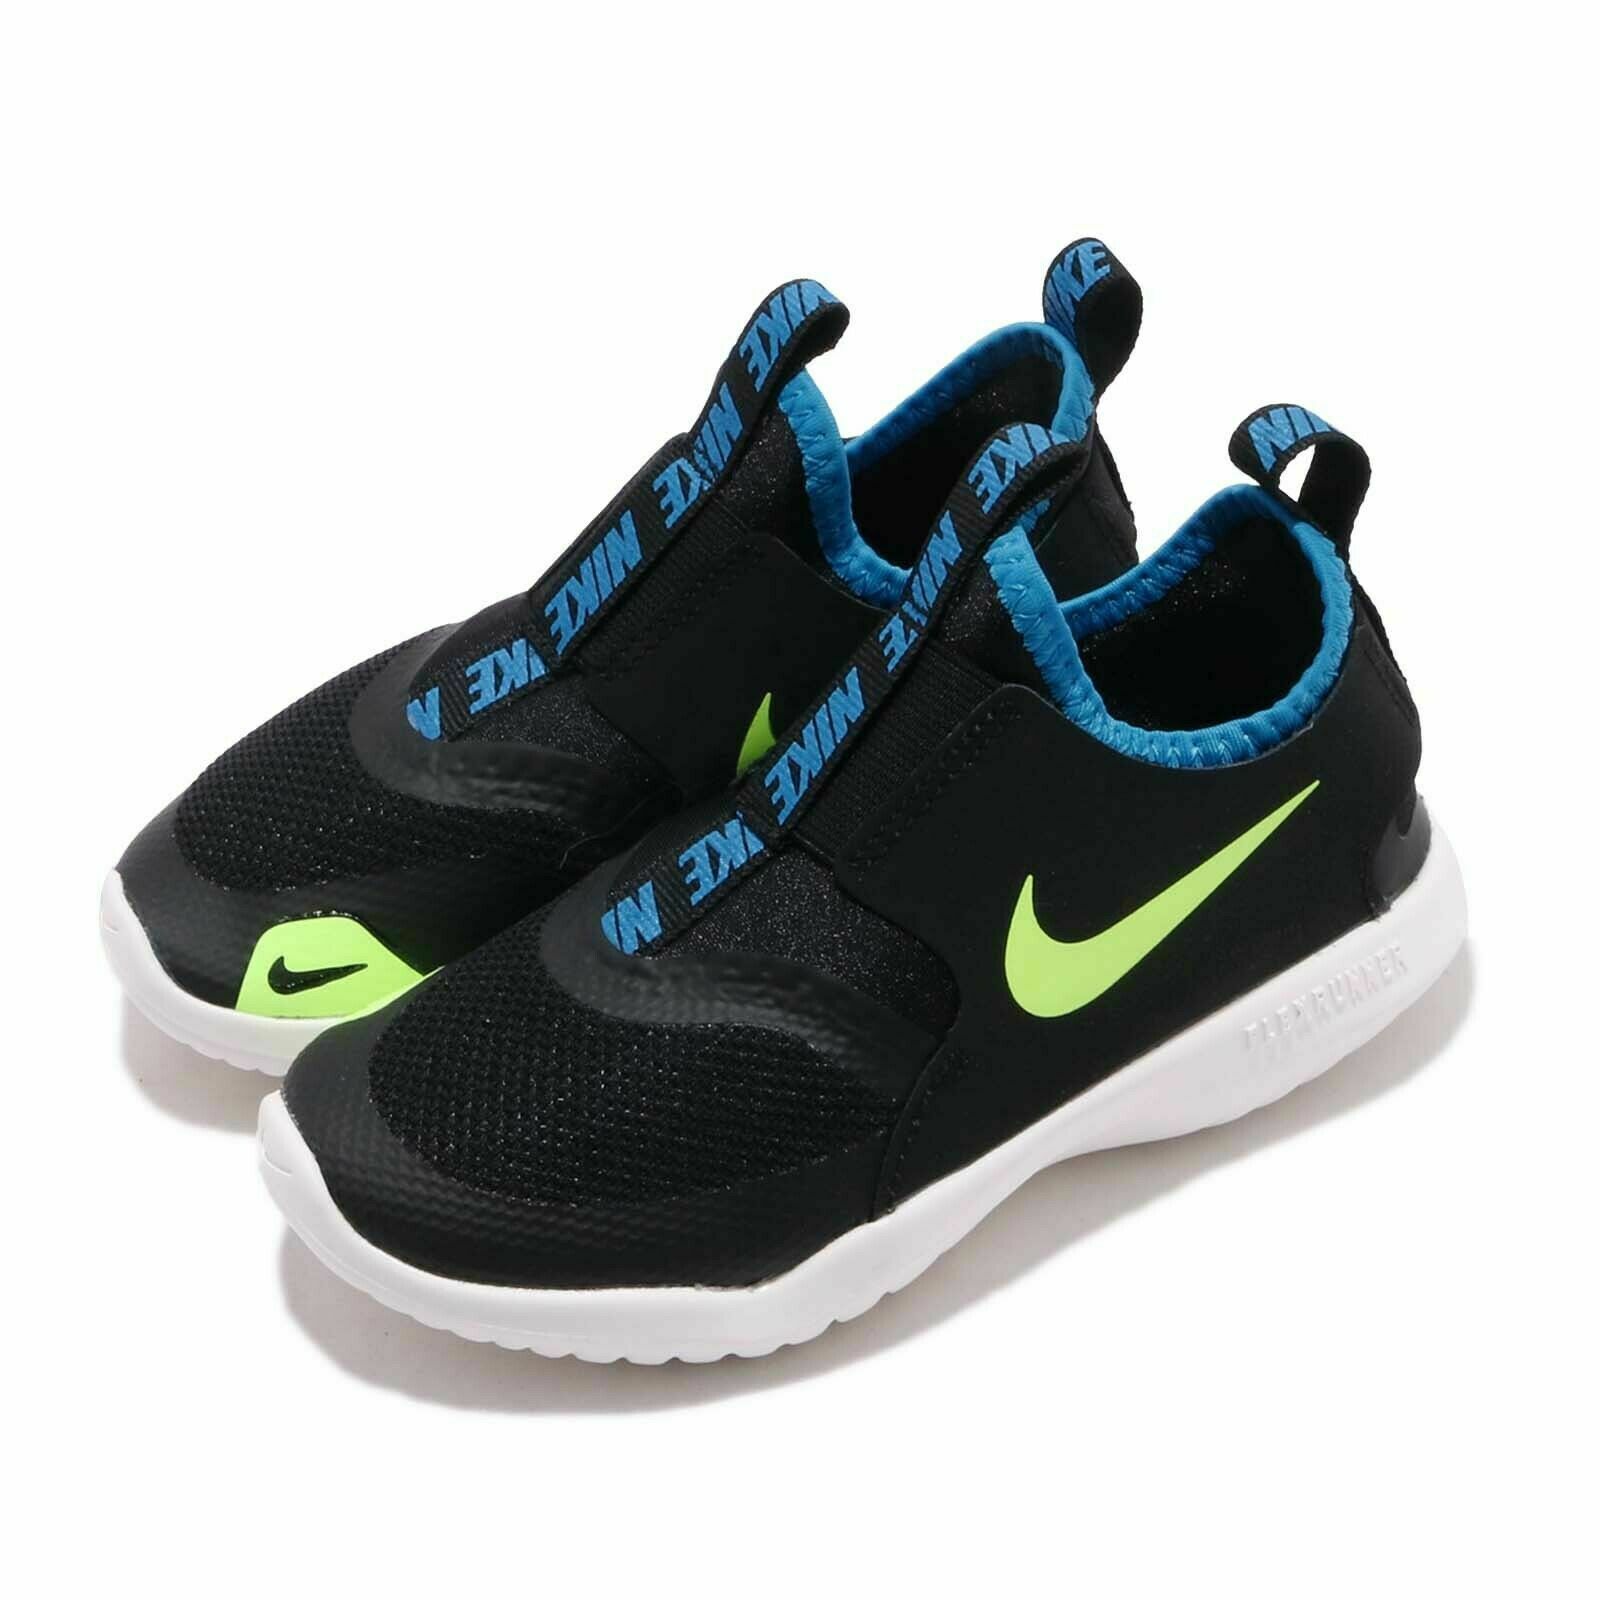 Nike Flex Runner Ps Kid's Shoes Assorted Sizes At4663 005